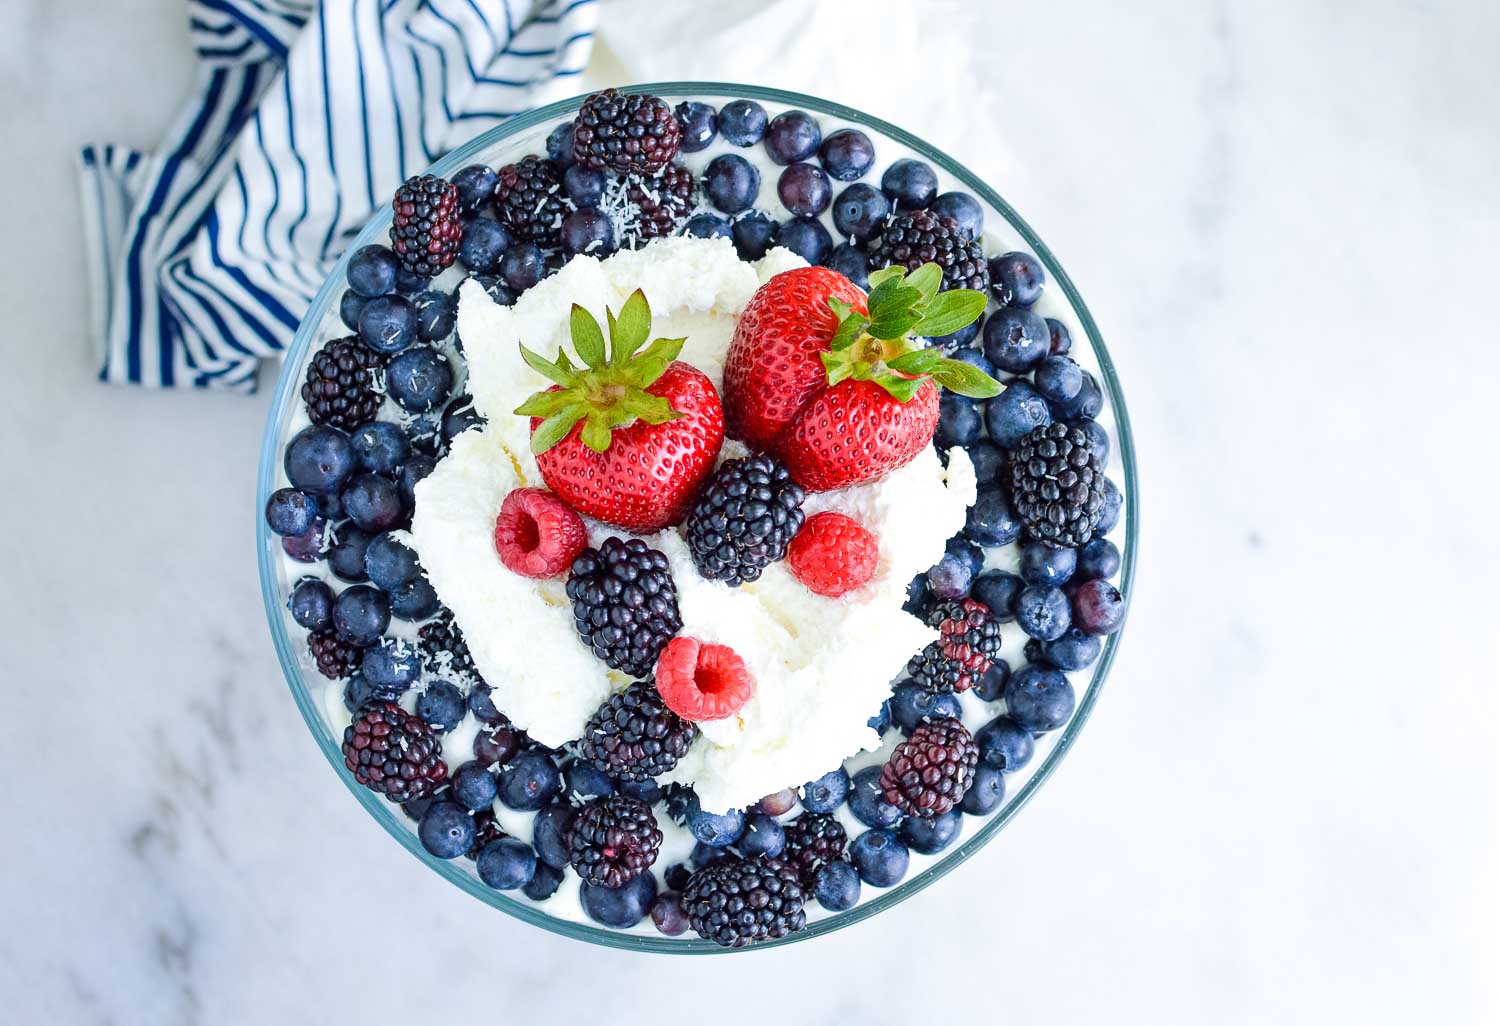 A top view of a clear glass dish filled with cake, berries, and cream with a blue and white towel around the bottom.